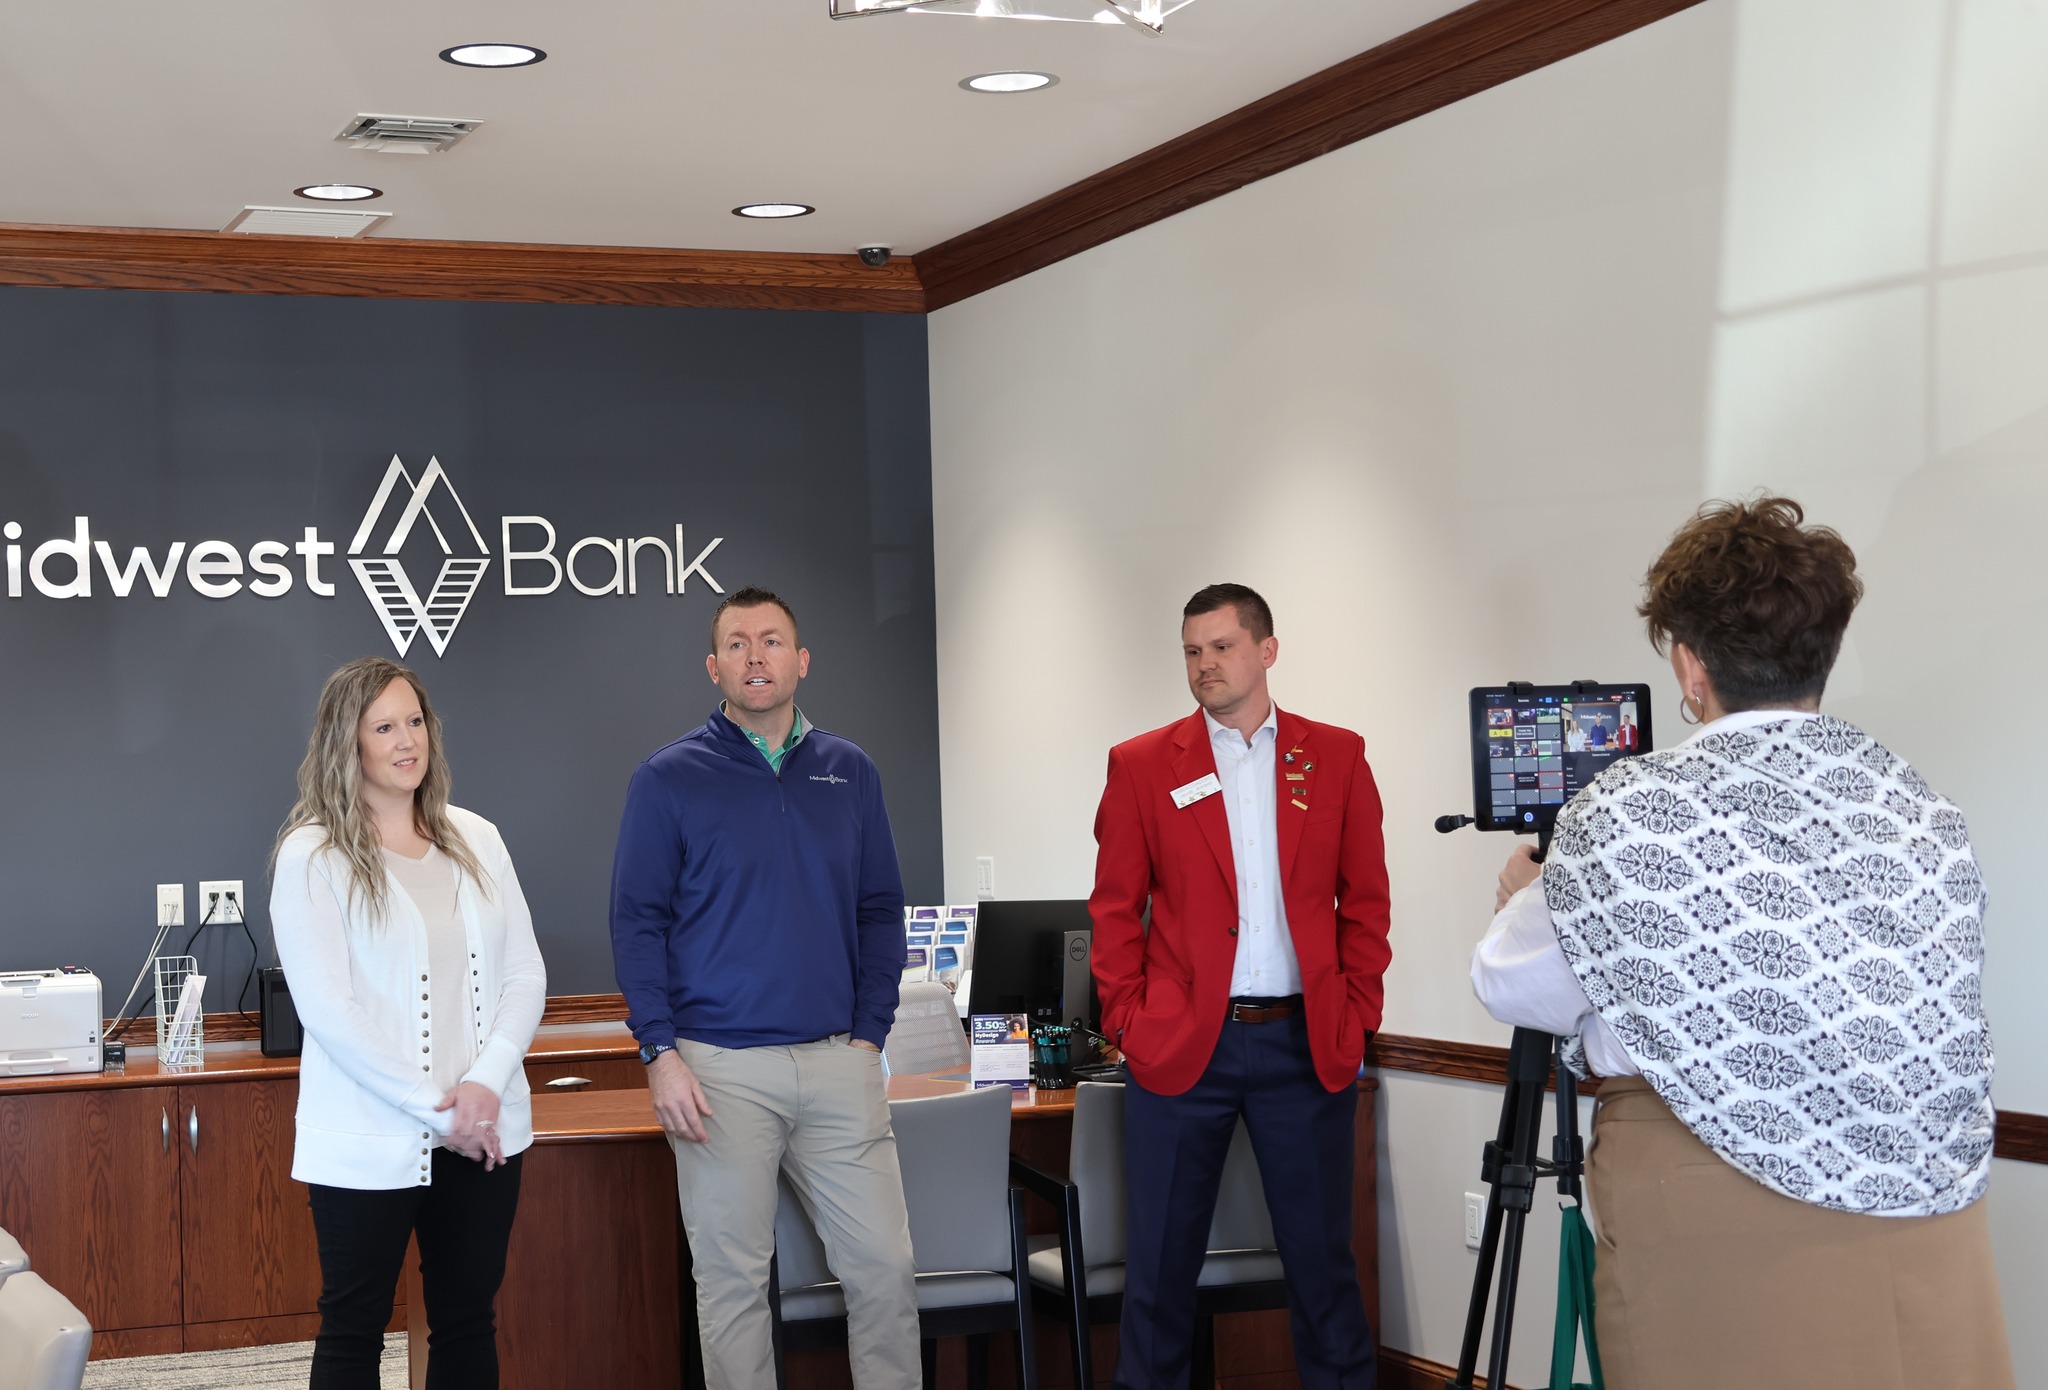 Midwest Bank's Midtown location had a ribbon cutting with the Norfolk area Chamber of Commerce